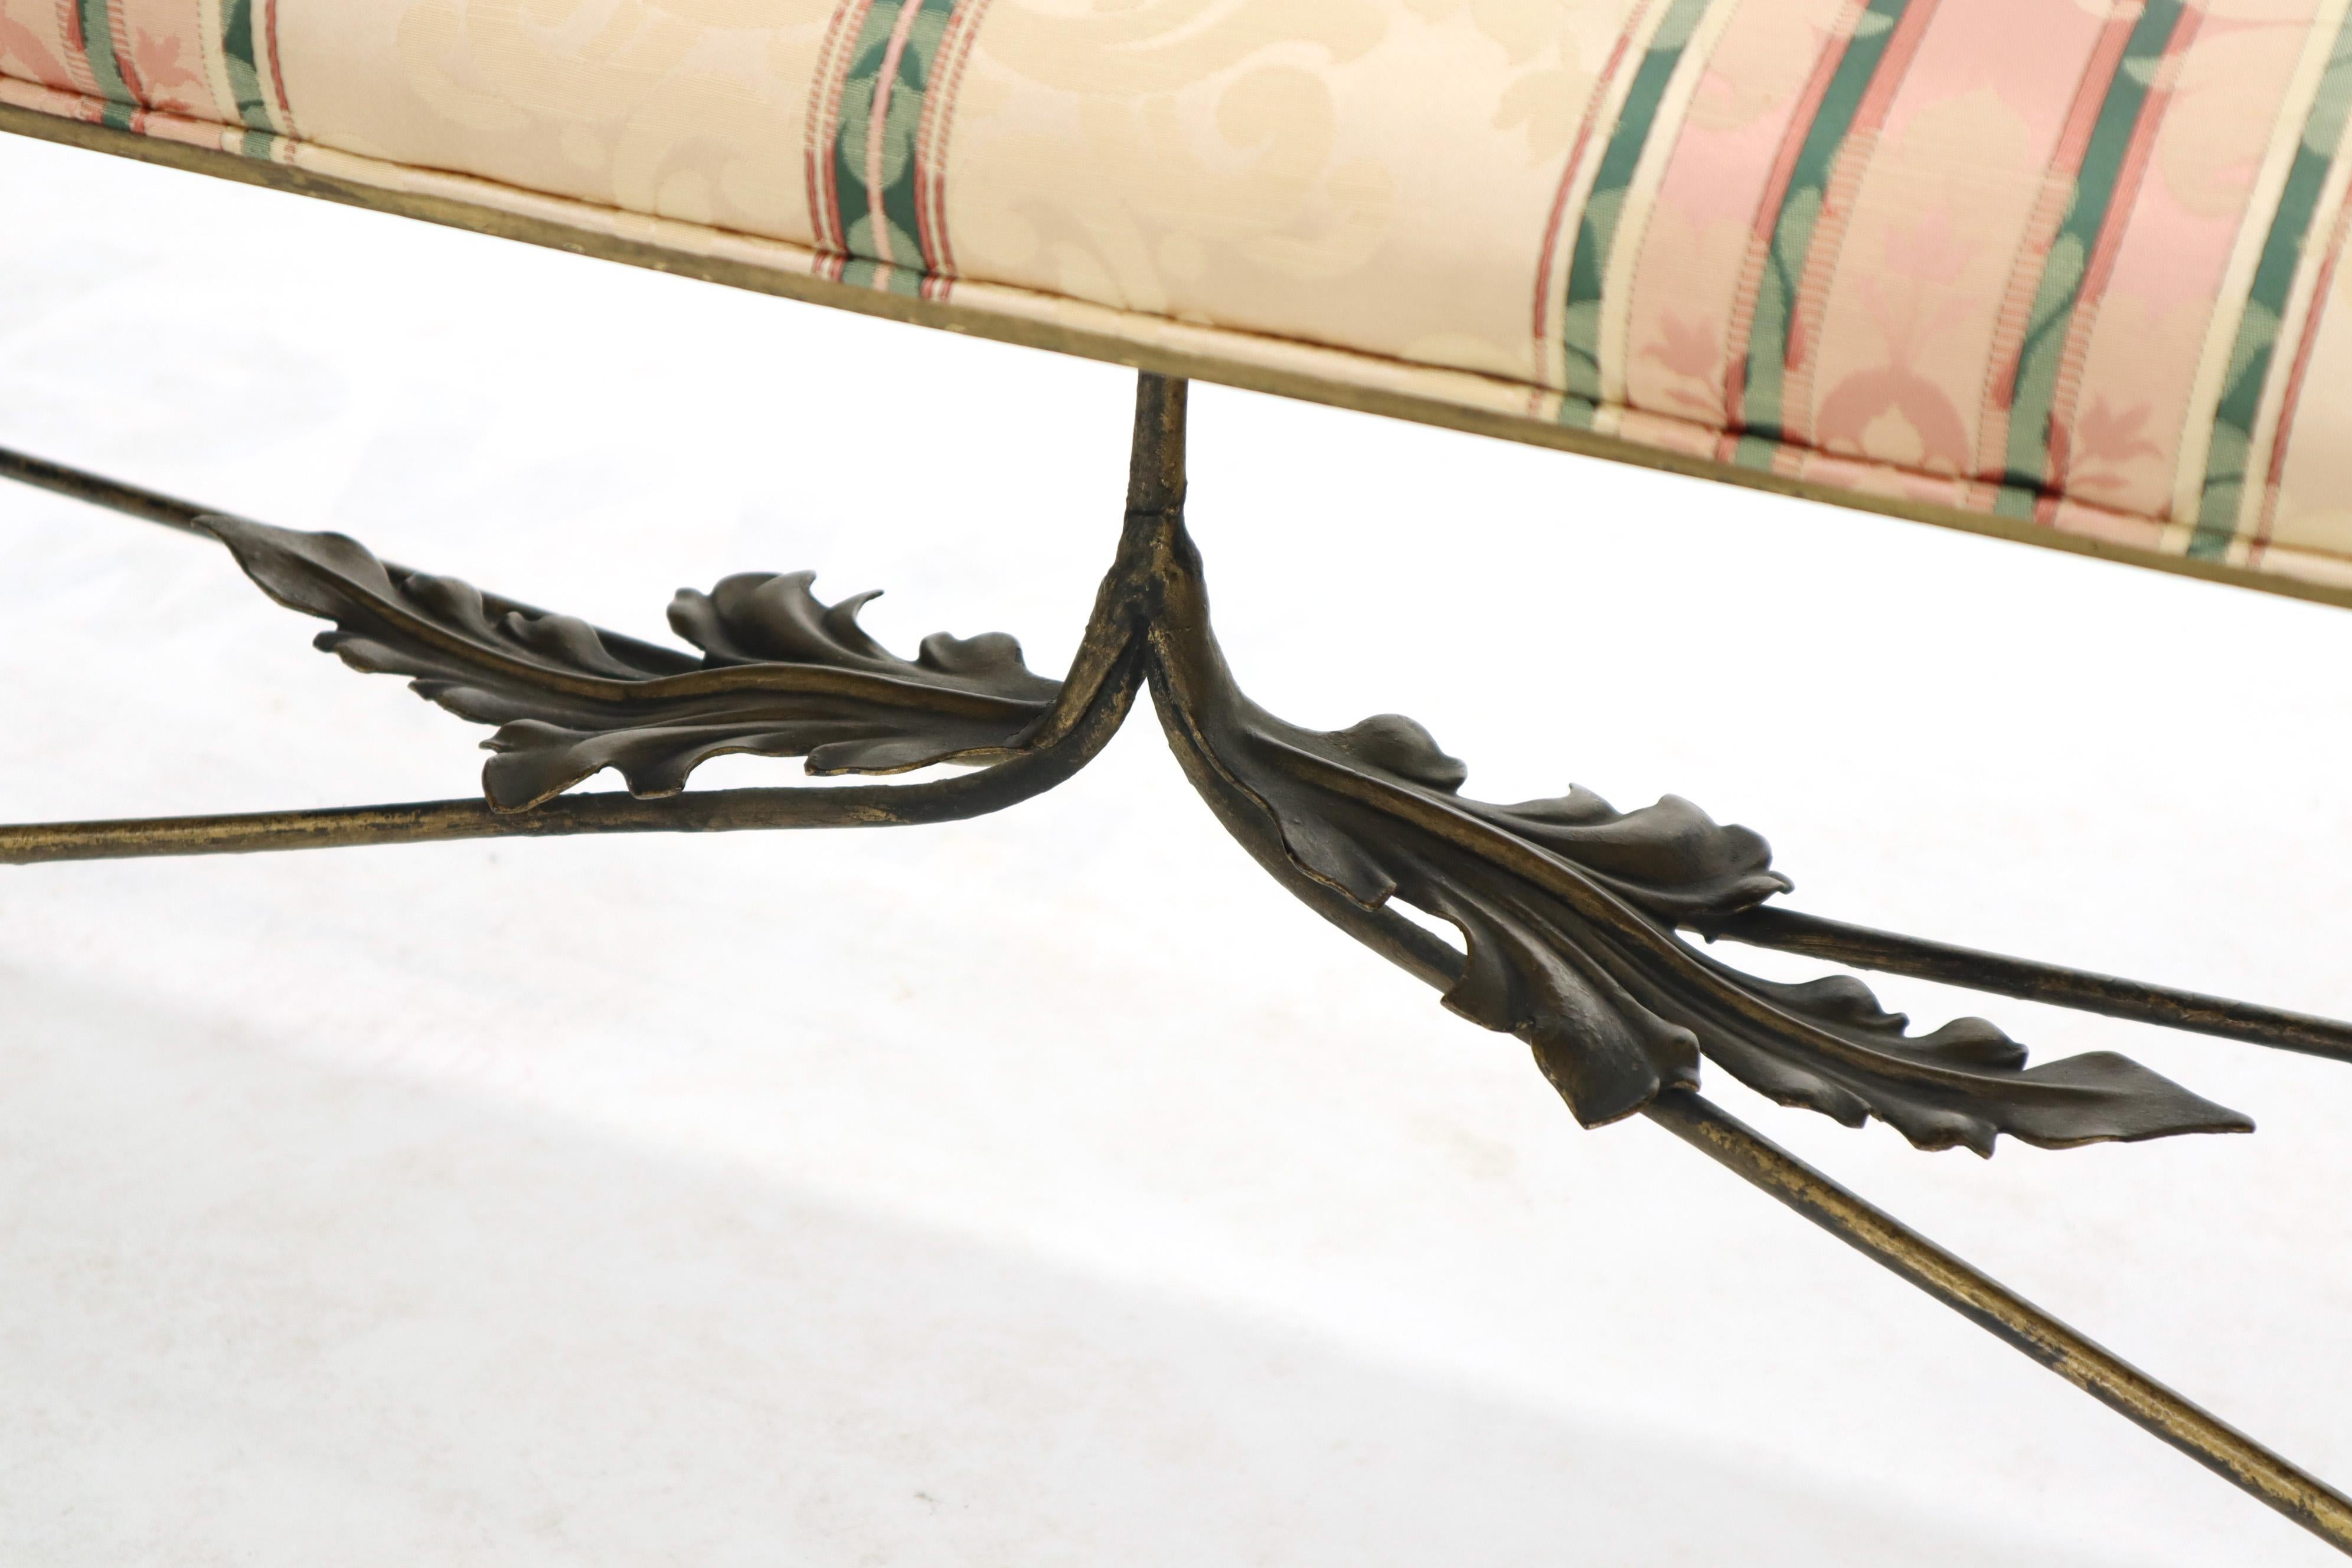 Figural Twisted Wrought Iron Window Bench Grape Leaf Motive In Good Condition For Sale In Rockaway, NJ